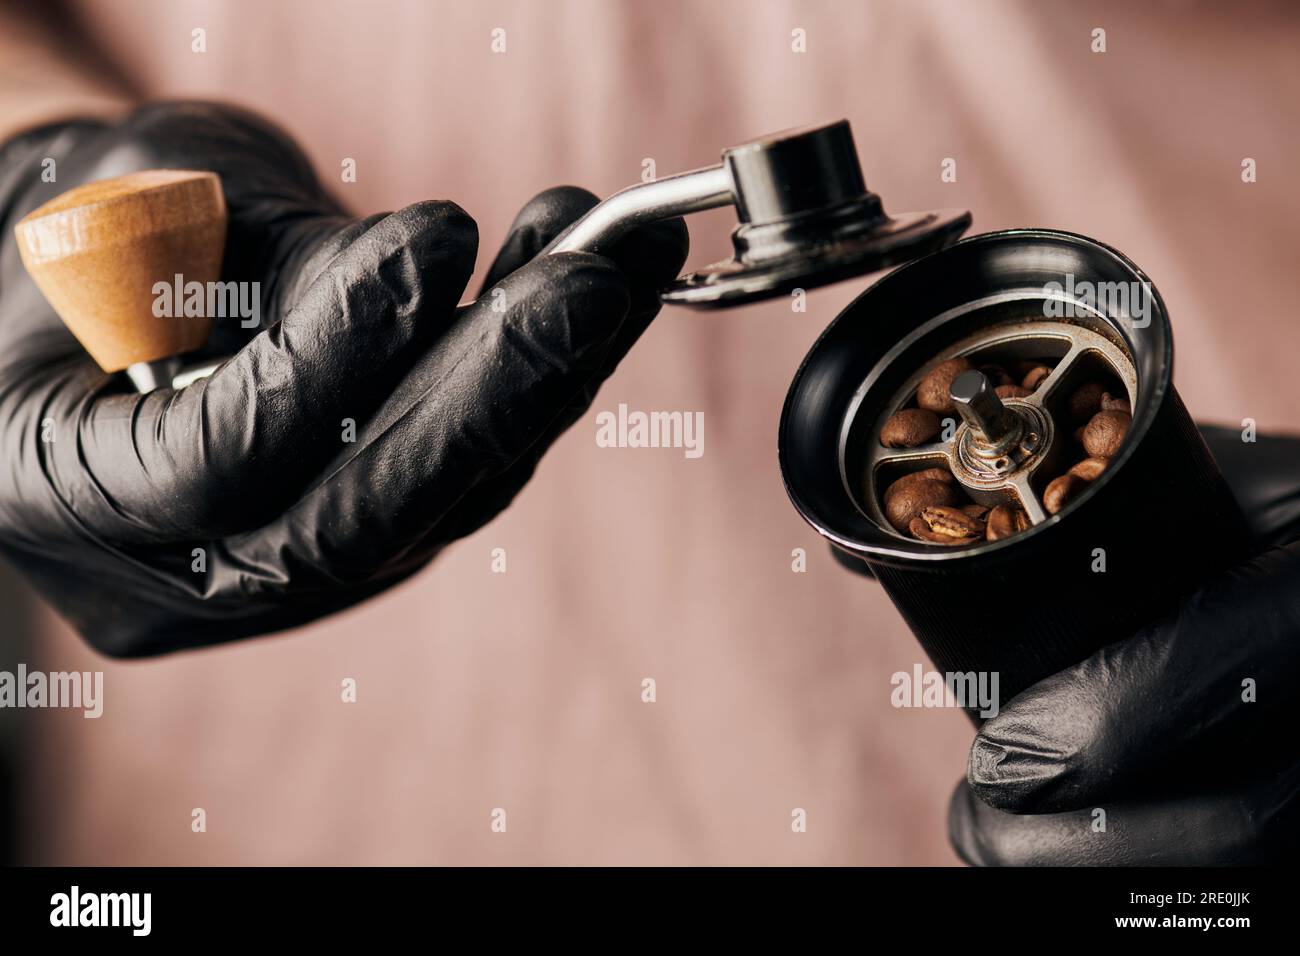 https://c8.alamy.com/comp/2RE0JJK/partial-view-of-barista-holding-manual-coffee-grinder-with-coffee-beans-arabica-drink-energy-2RE0JJK.jpg